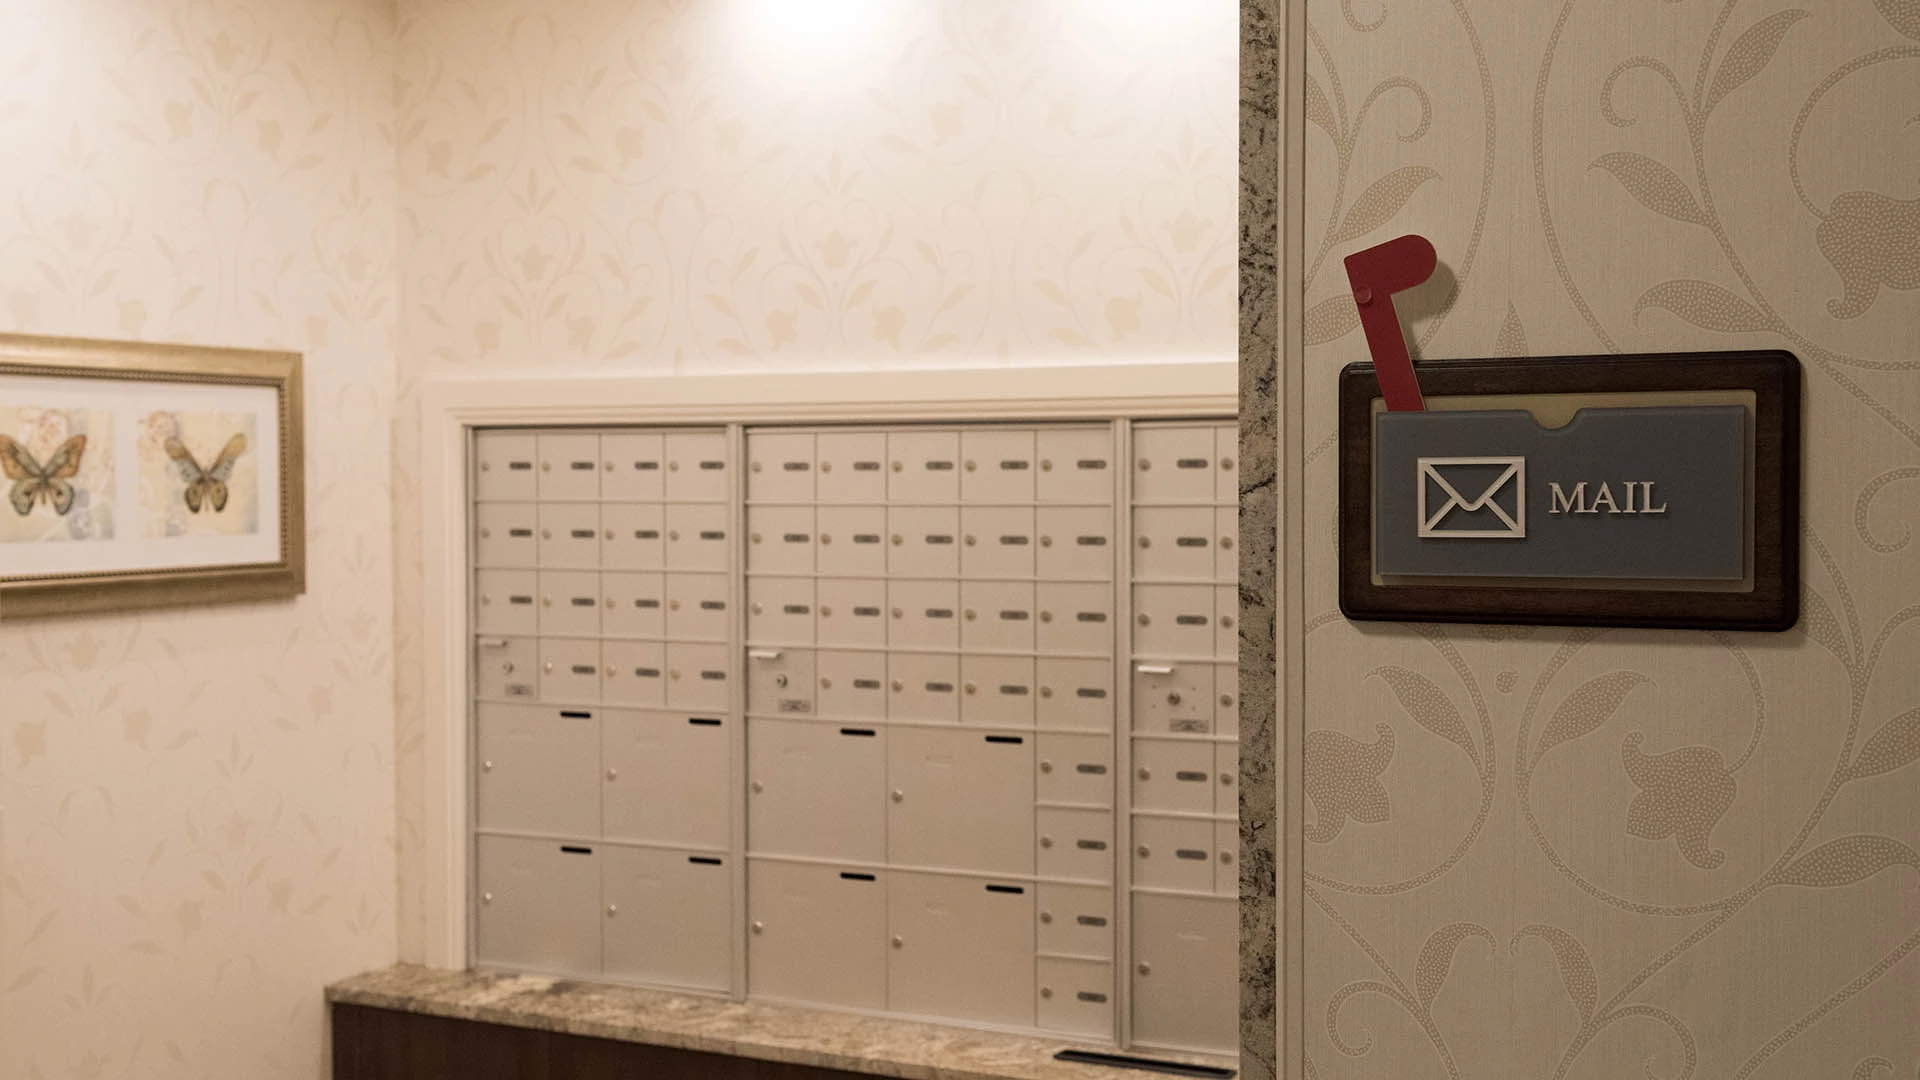 Mail room at MacTaggart Place senior housing